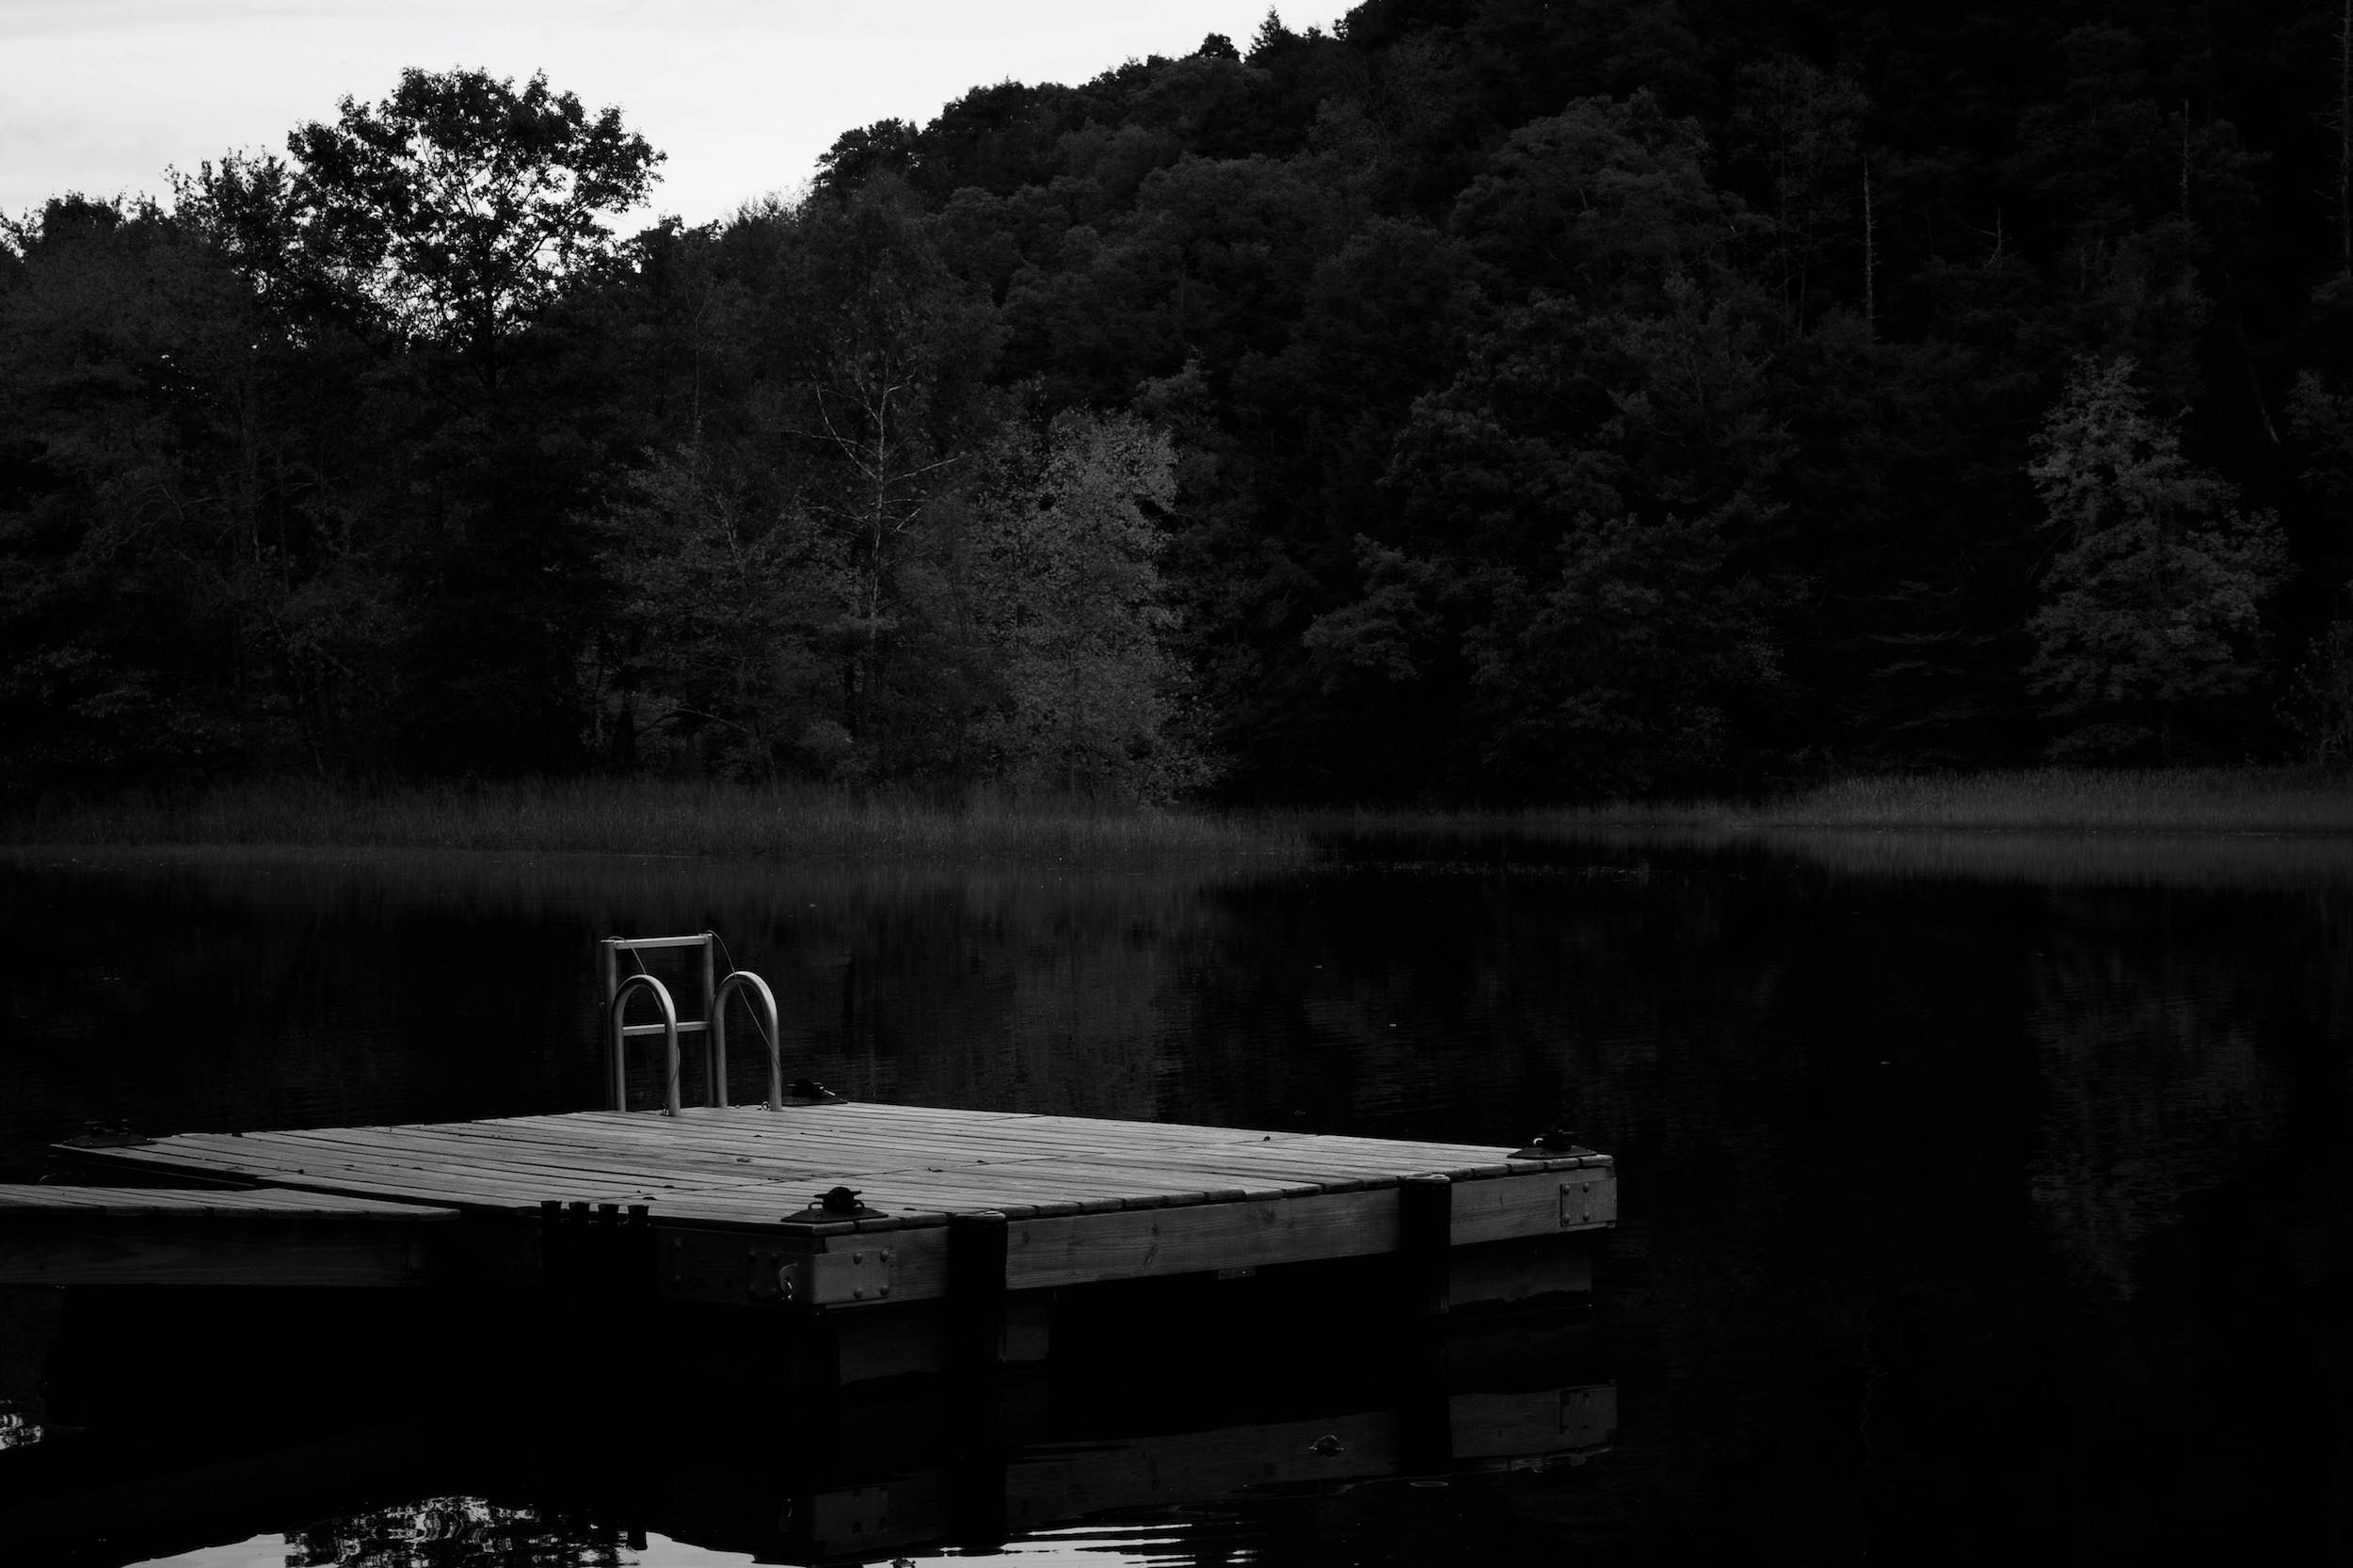 A photo tribute to Creepshow 2, The Raft, by Stephen King. A black and white photo of a dock with a ladder in the middle of a lake.